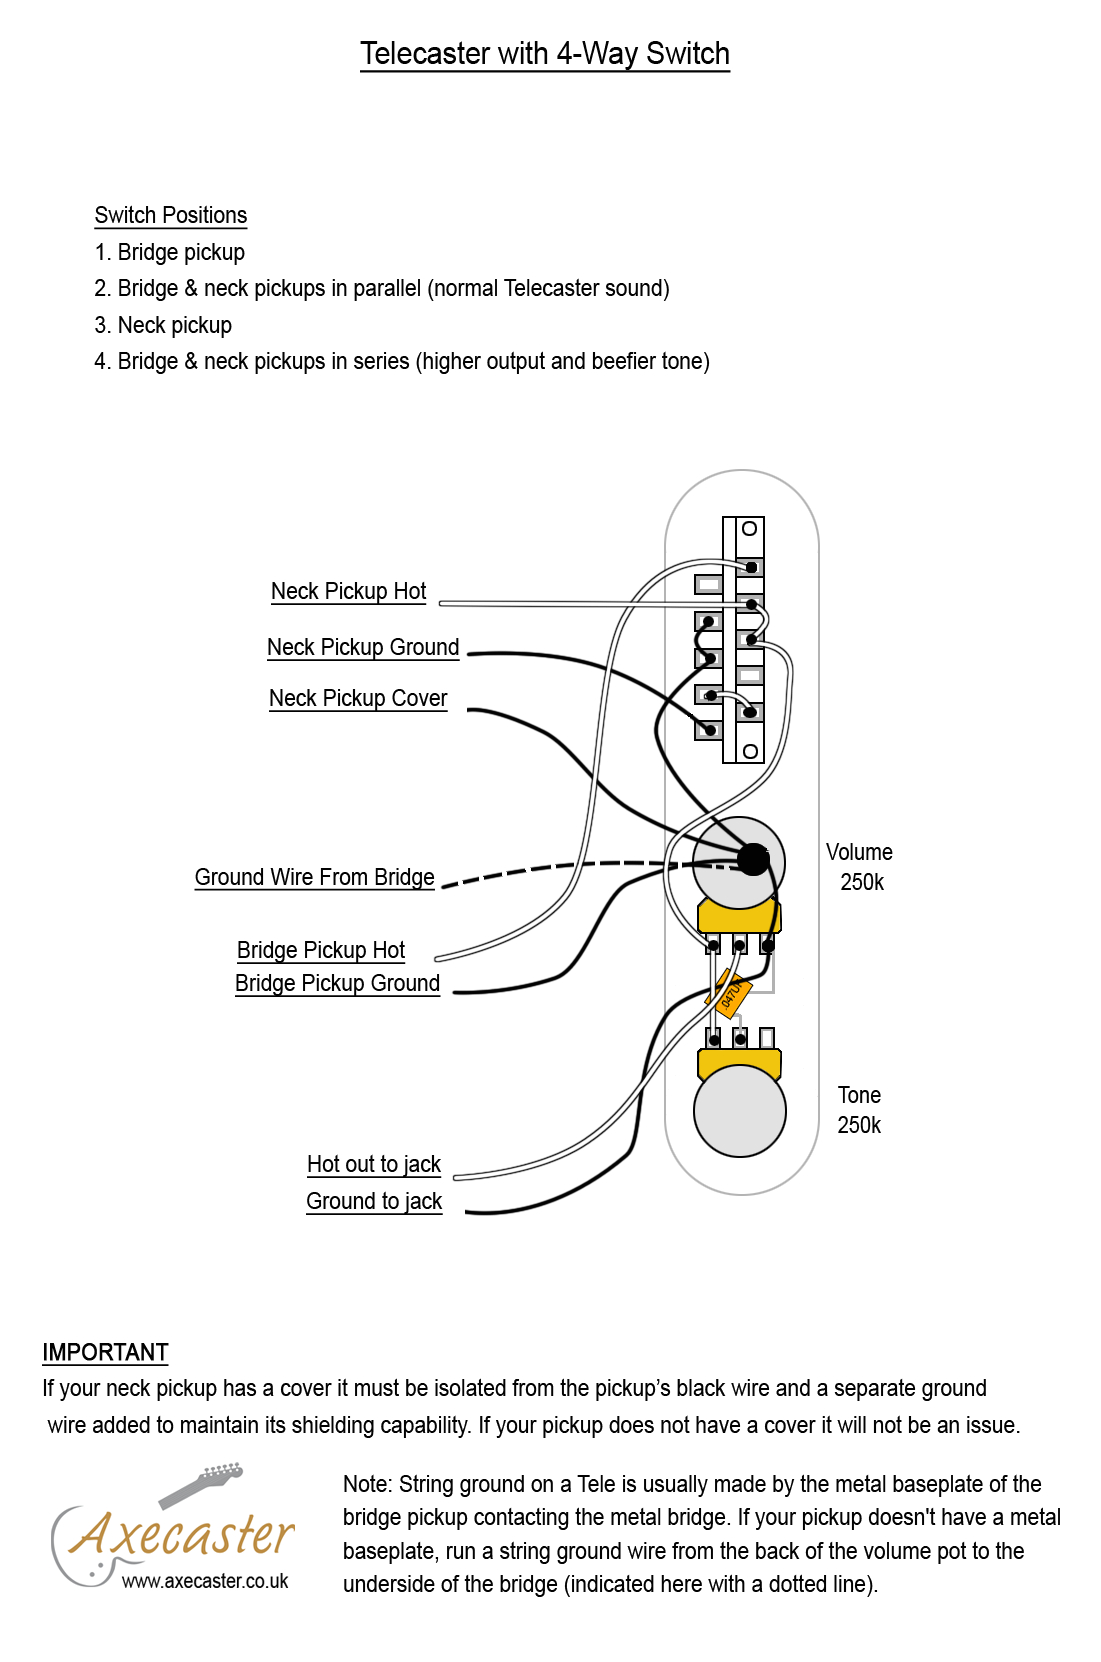 wiring diagrams axecaster build it how you want itwiring diagrams for both bridge parallel neck